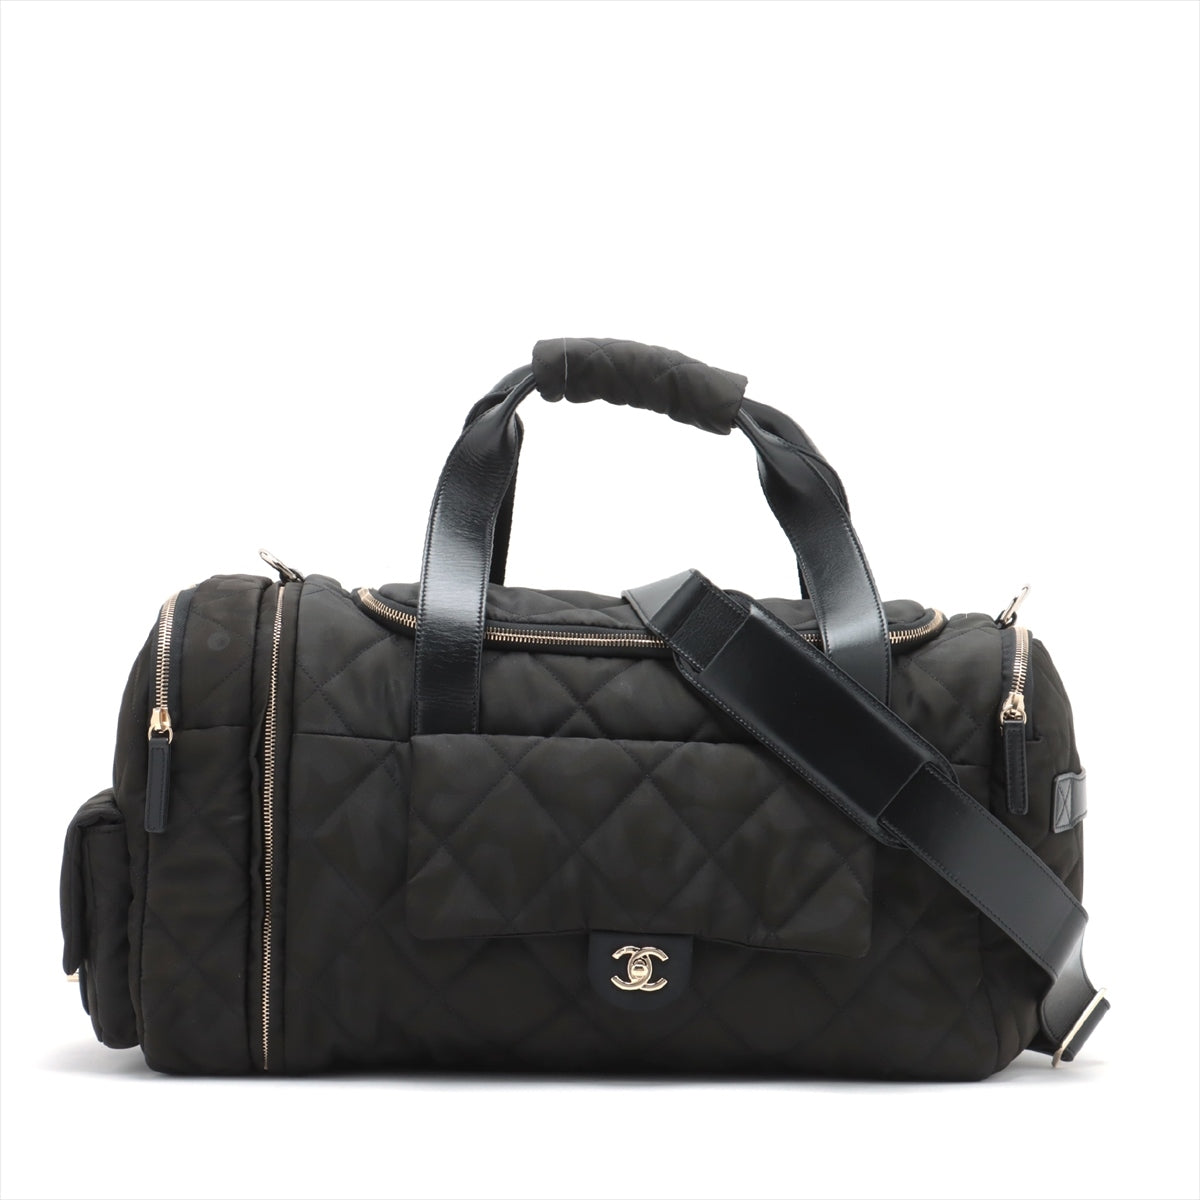 Chanel Coco Neige Nylon & leather 2WAY BOSTON BAG Black Gold Metal fittings There is an IC chip AS3532